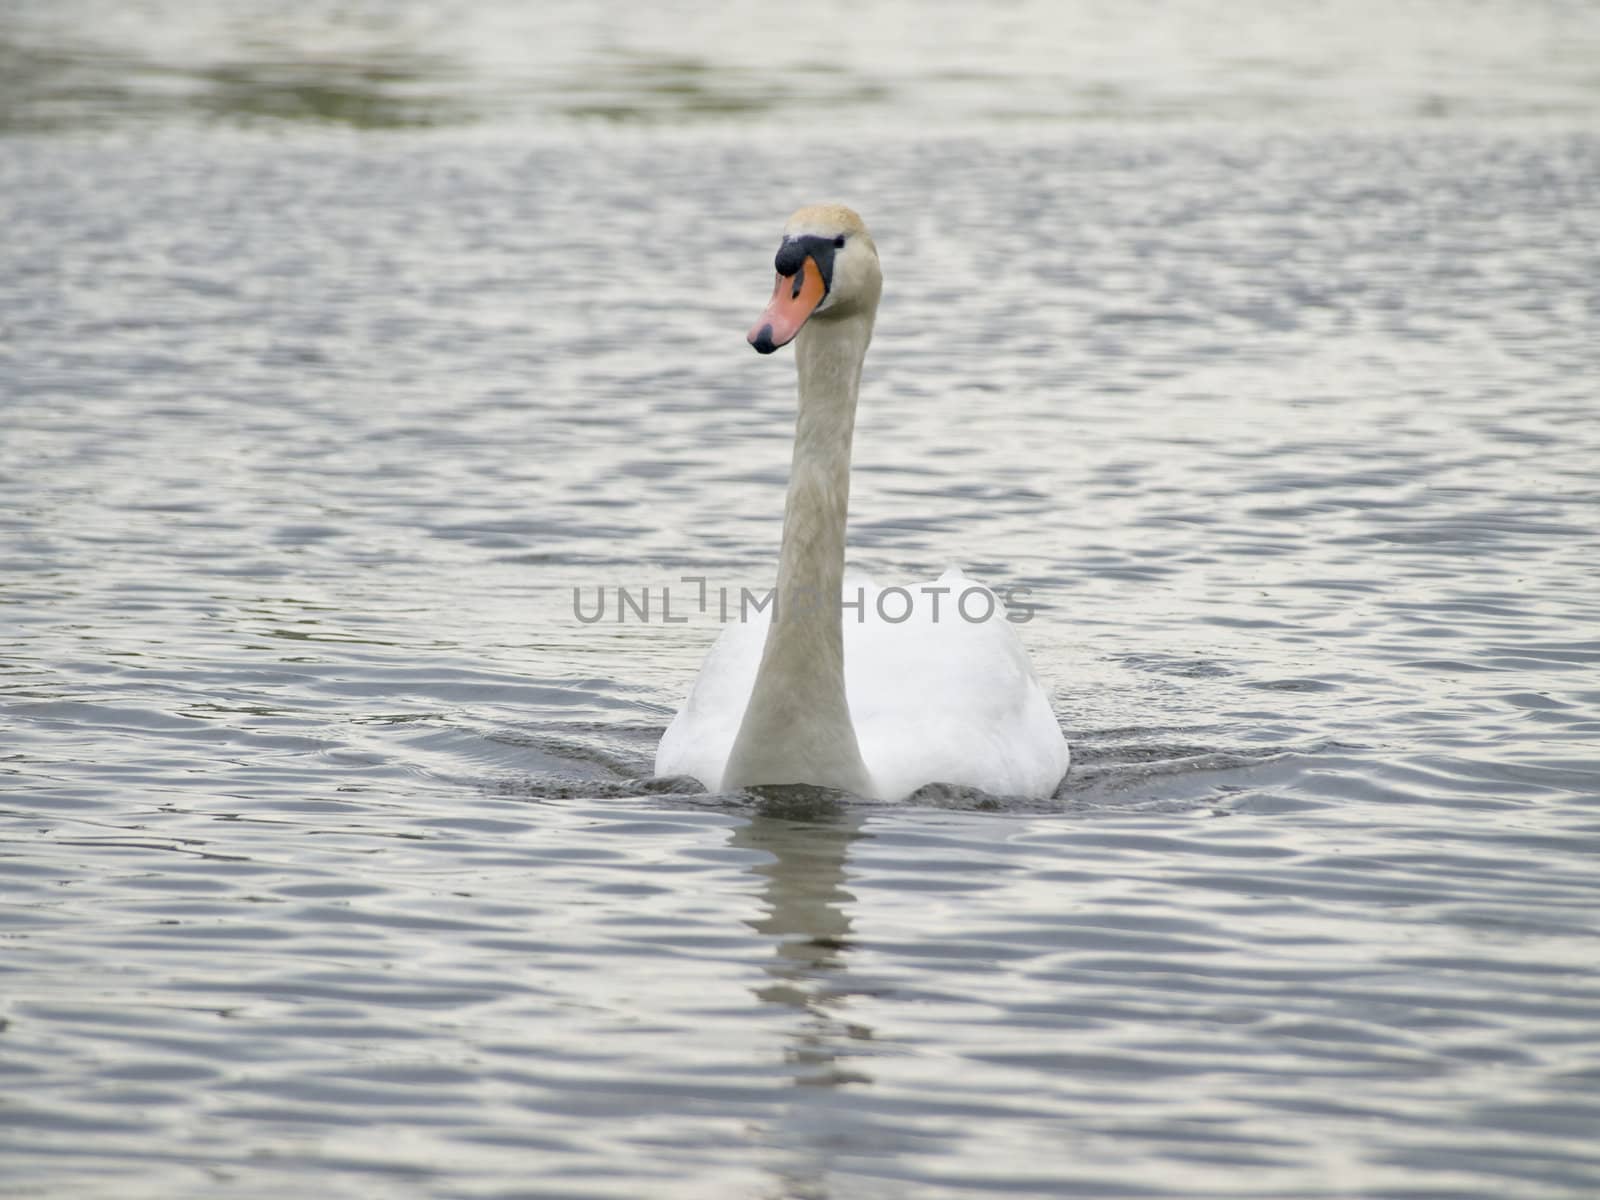 Swimming swan by SNR